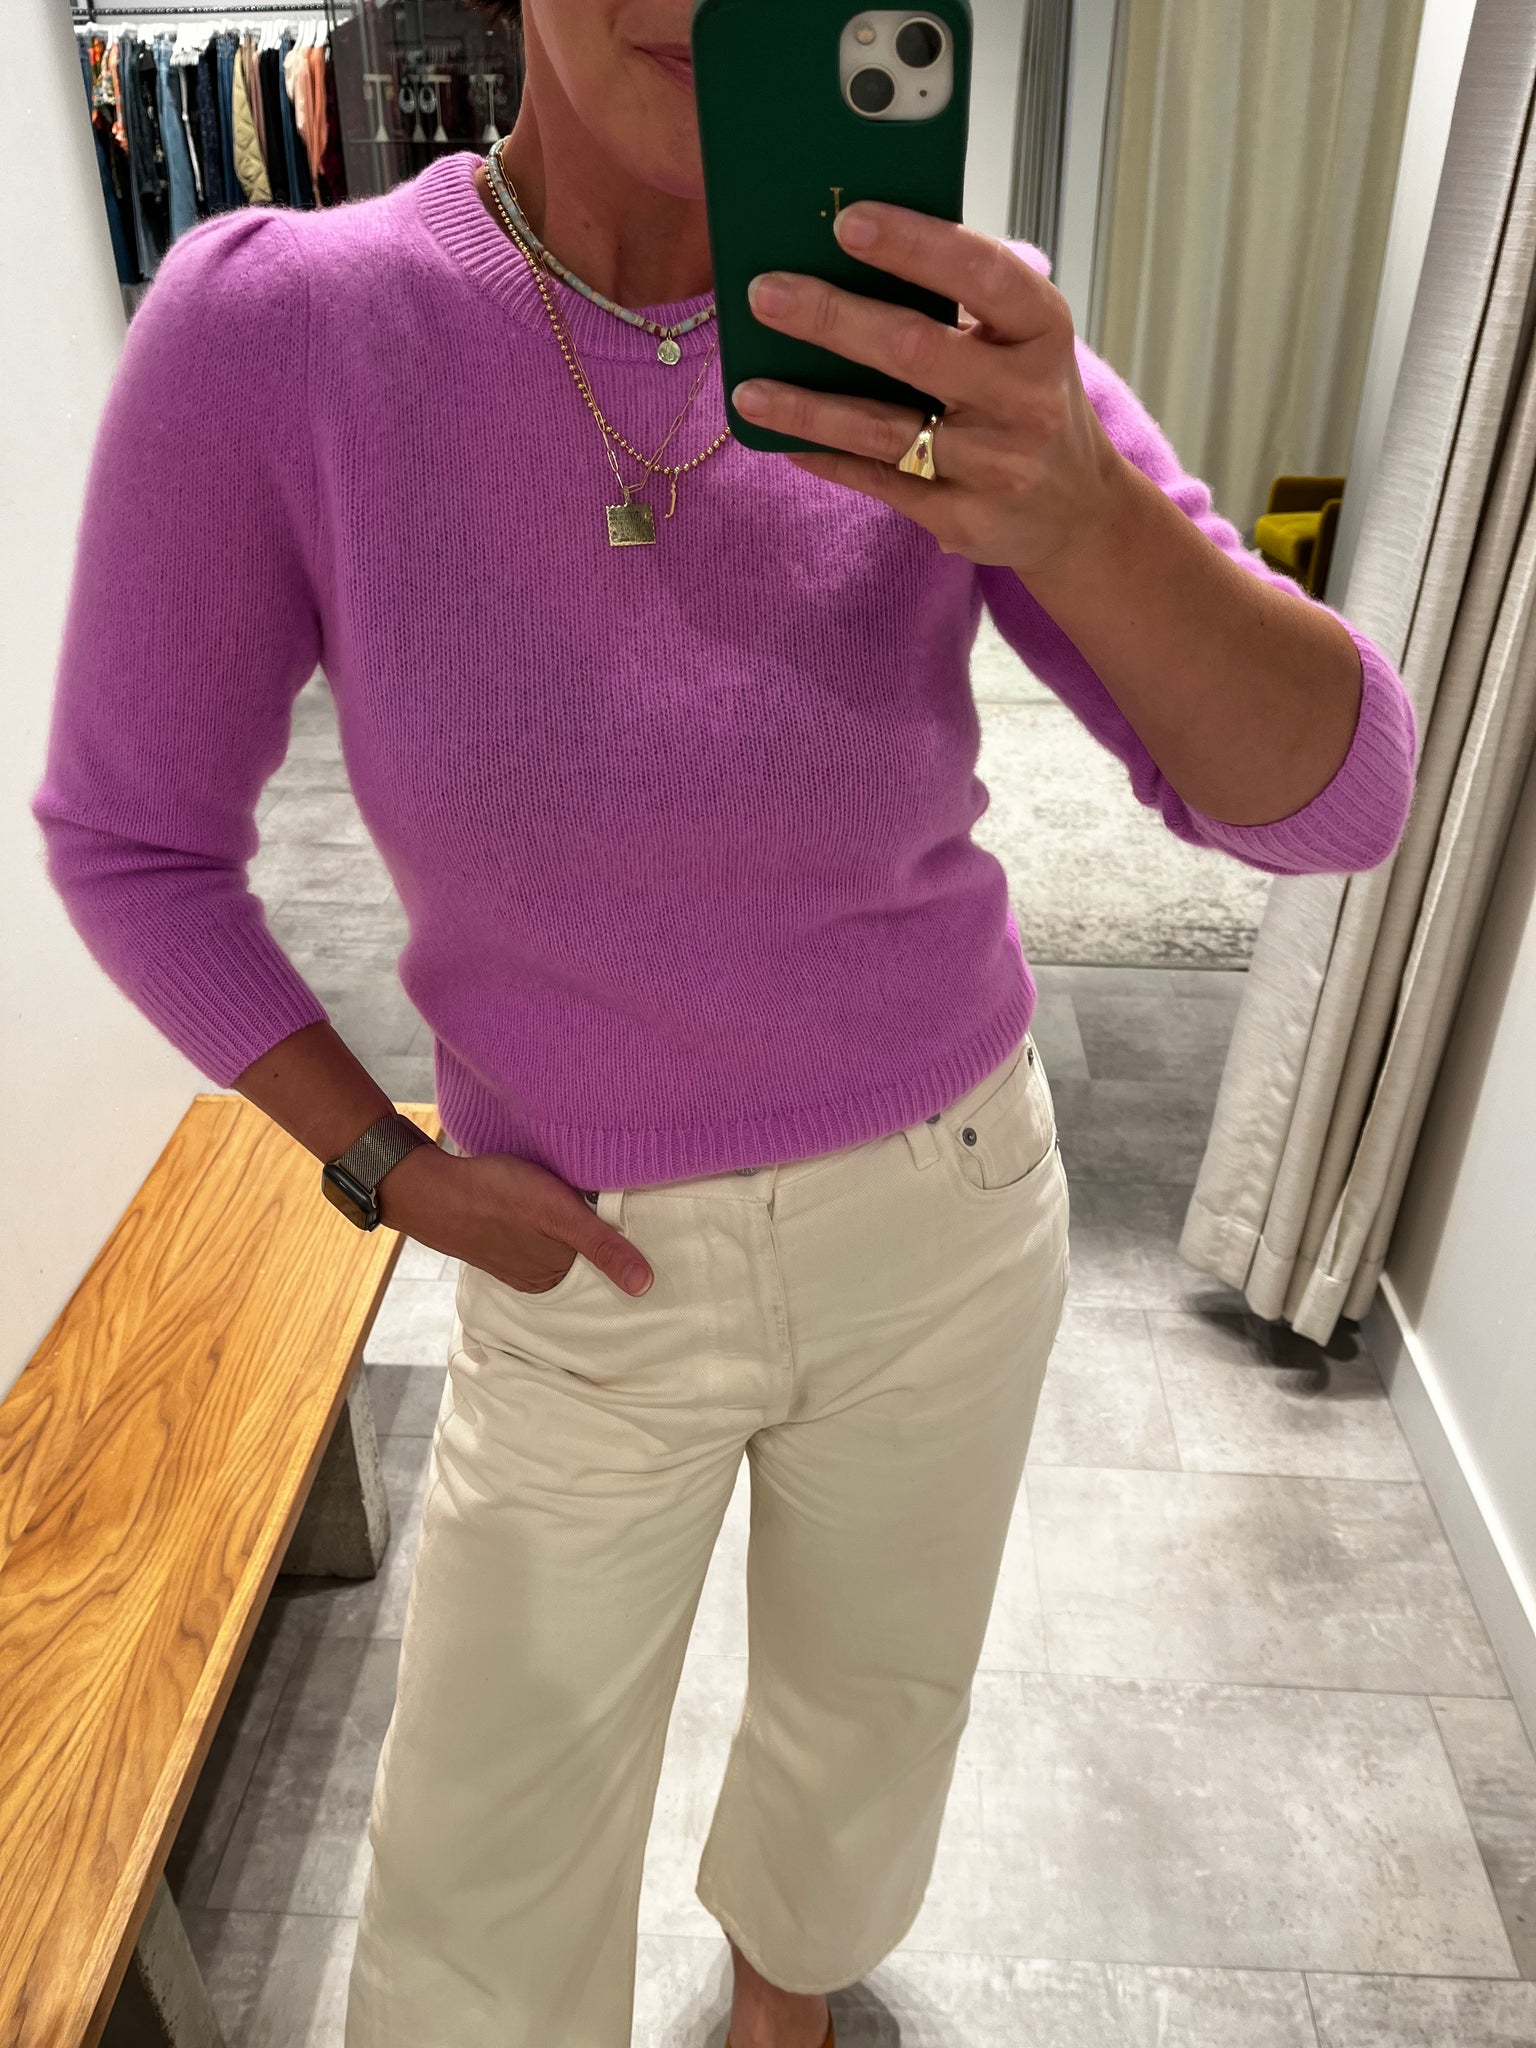 Cashmere Featherweight Puff Sleeve Crewneck in Neon Mauve